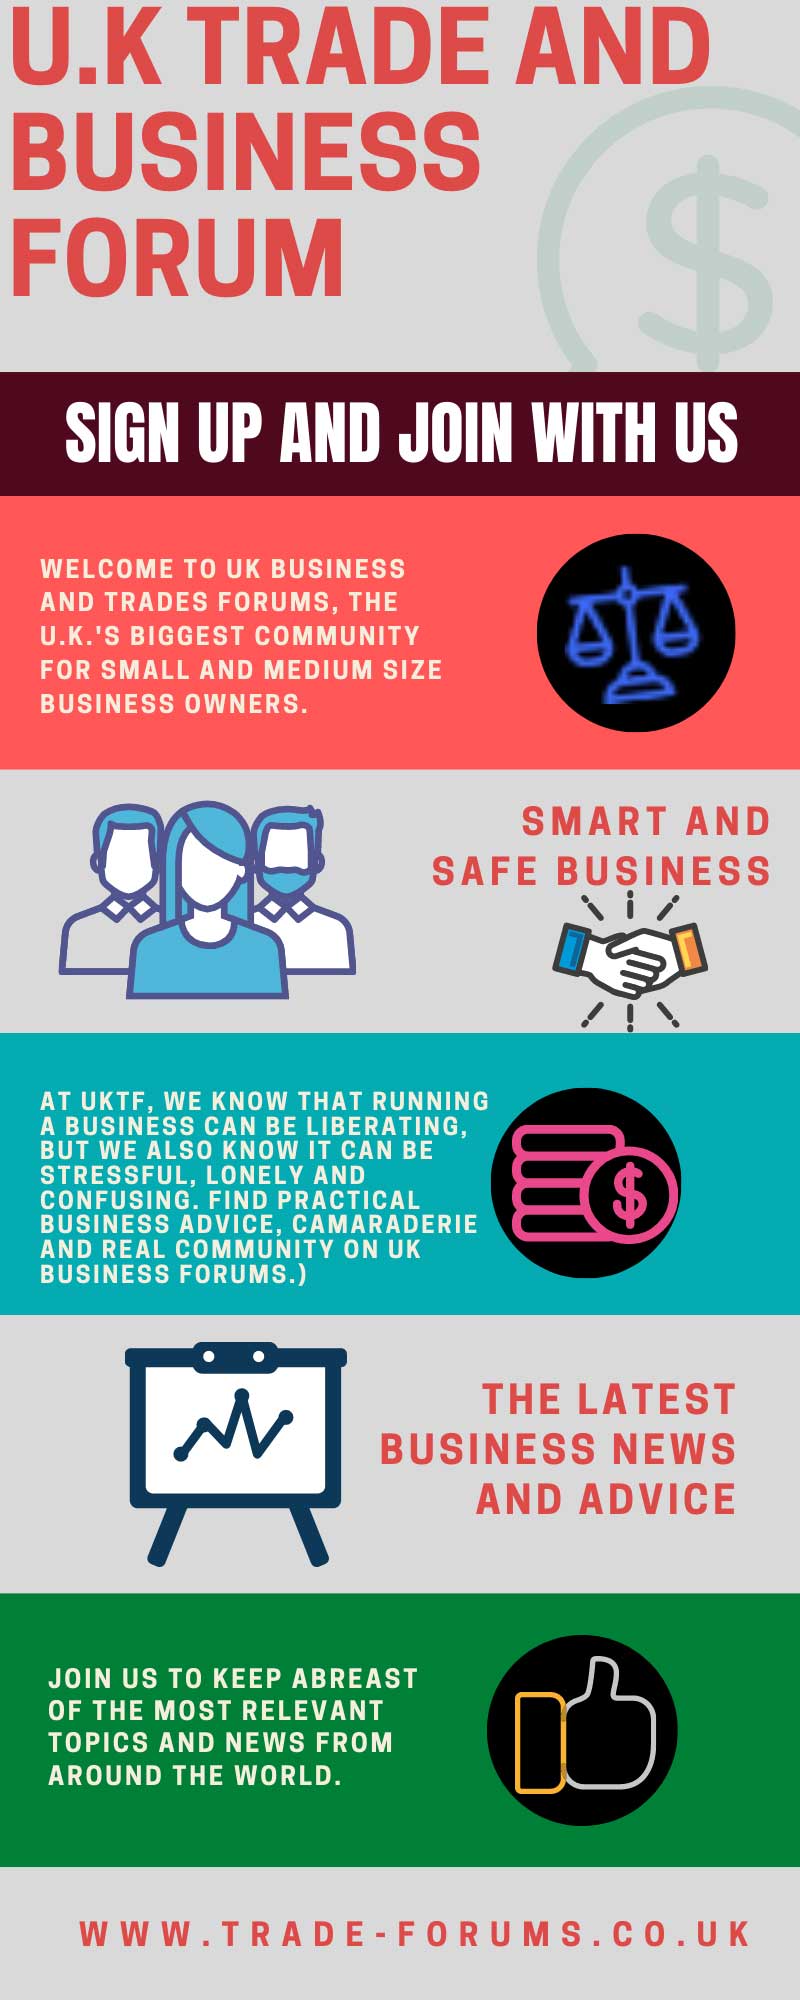 uk trade and business forum infographic